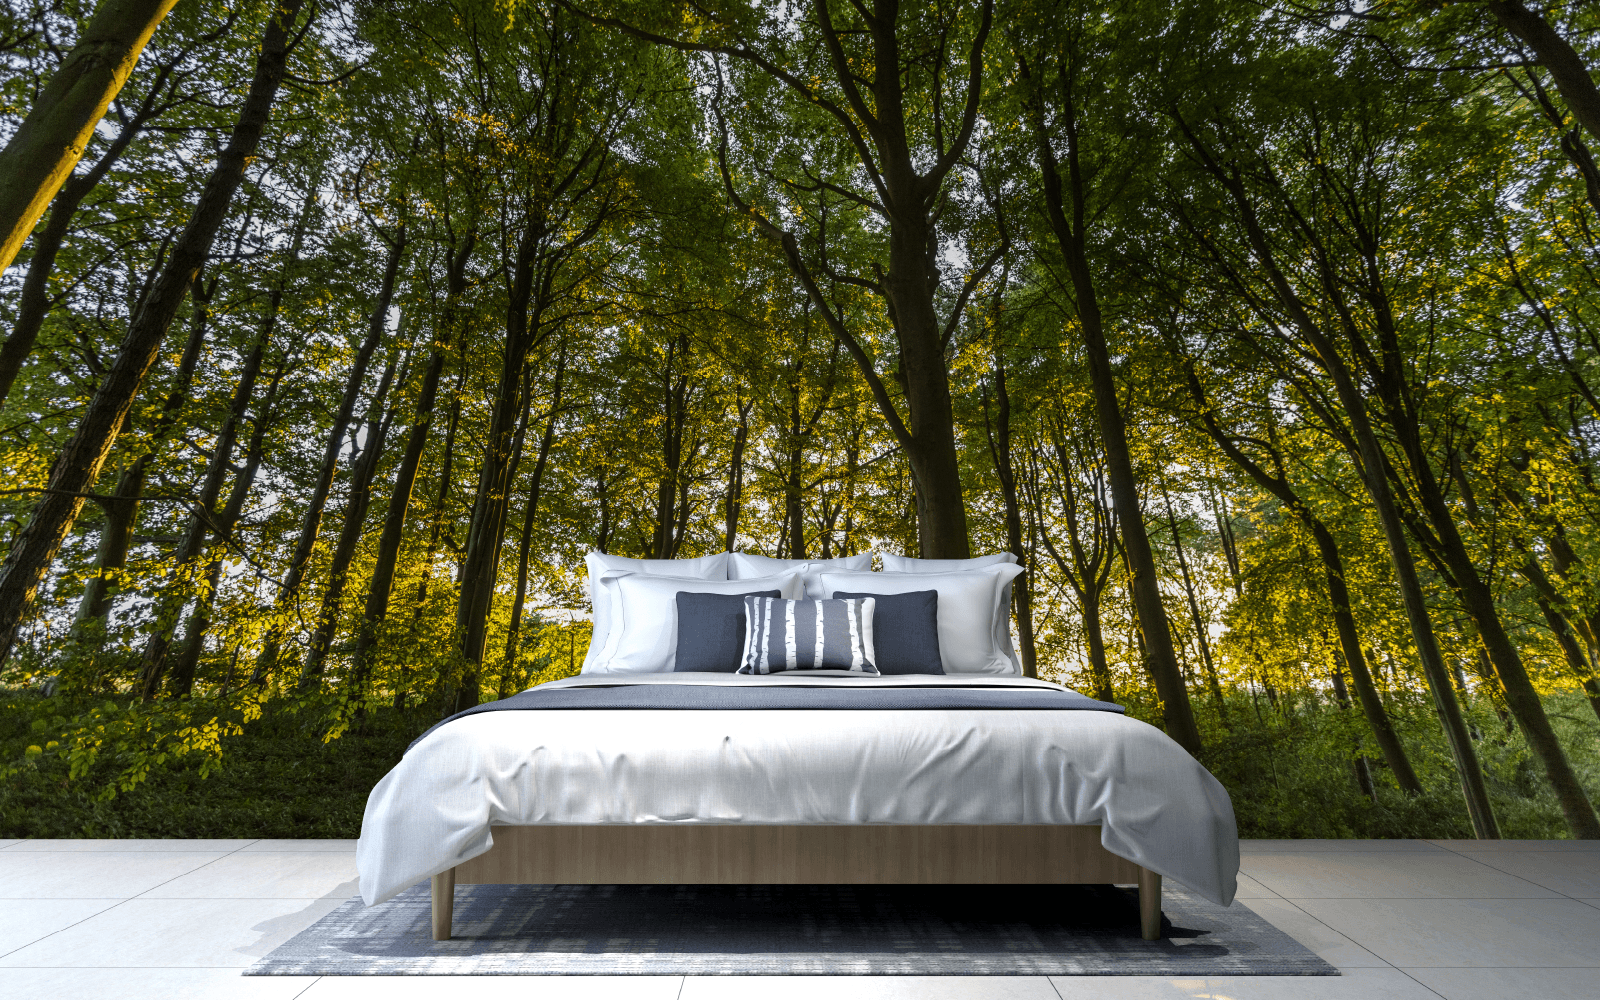 Imagine peace and contentment as you glide under the cool and quiet canopy. Bring the beauty and serenity of the forest into your home.